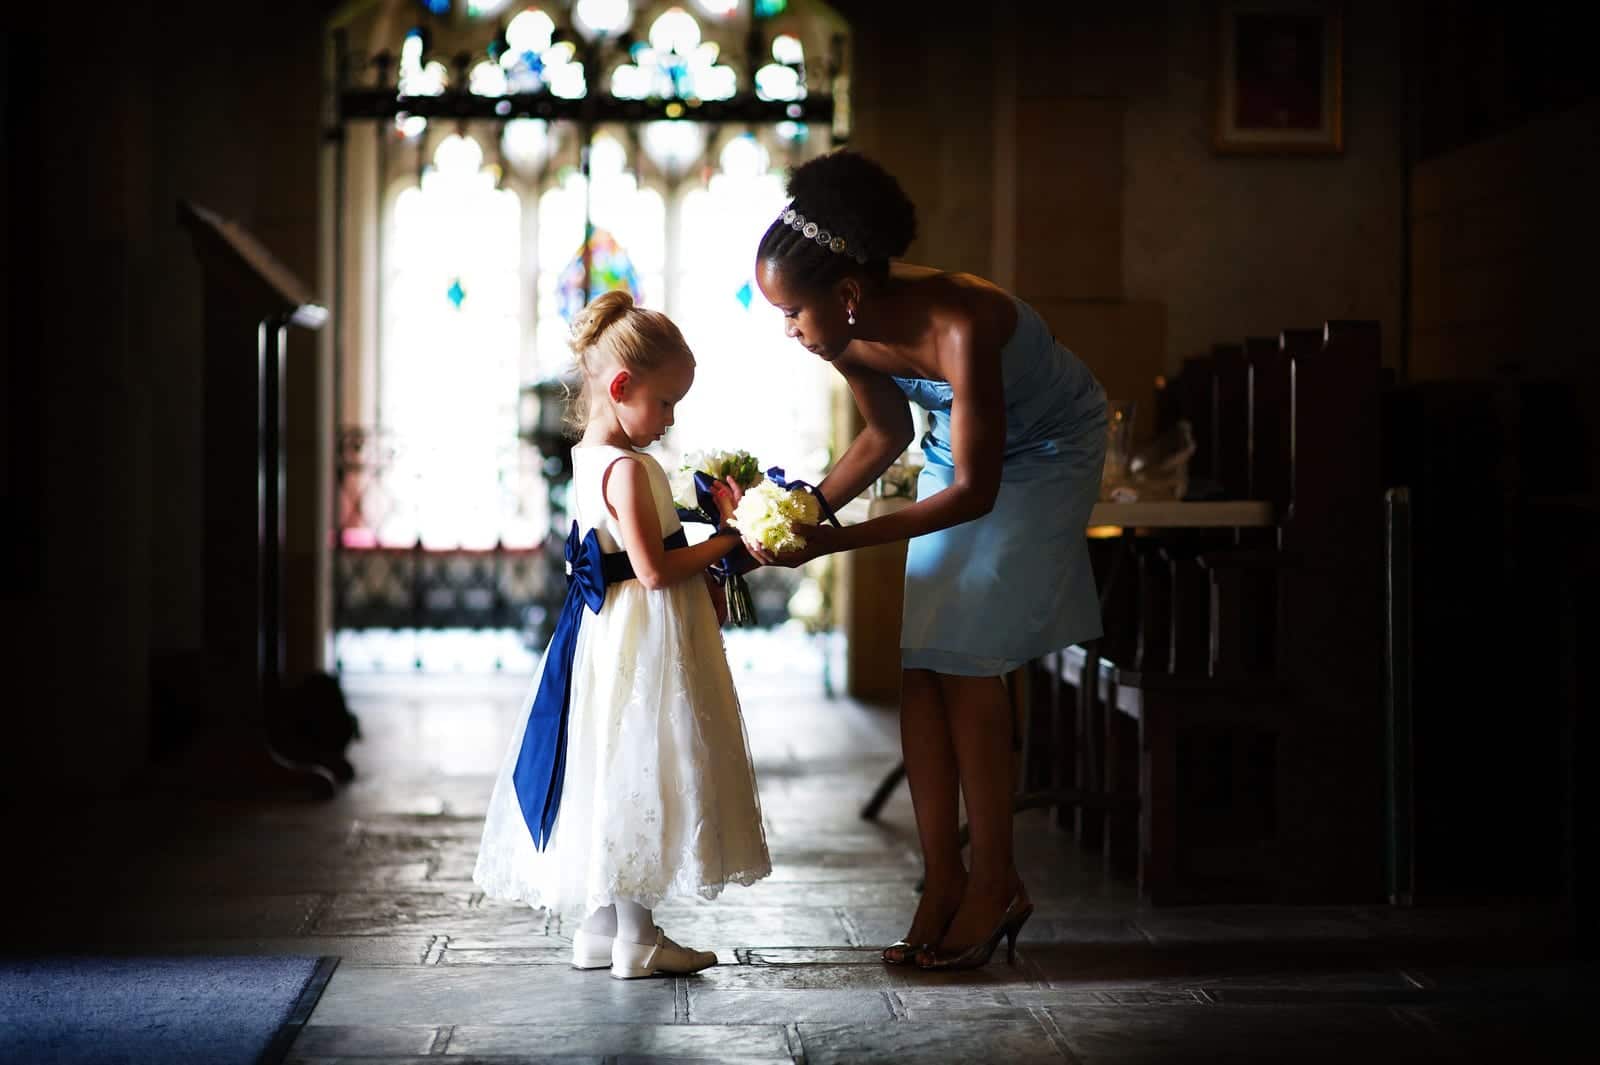 A bridesmaid in a light blue dress helps a flower girl with her bouquet in the back of Sacred Heart Church in Shadyside. The flower girl is wearing a white dress with a blue bow.